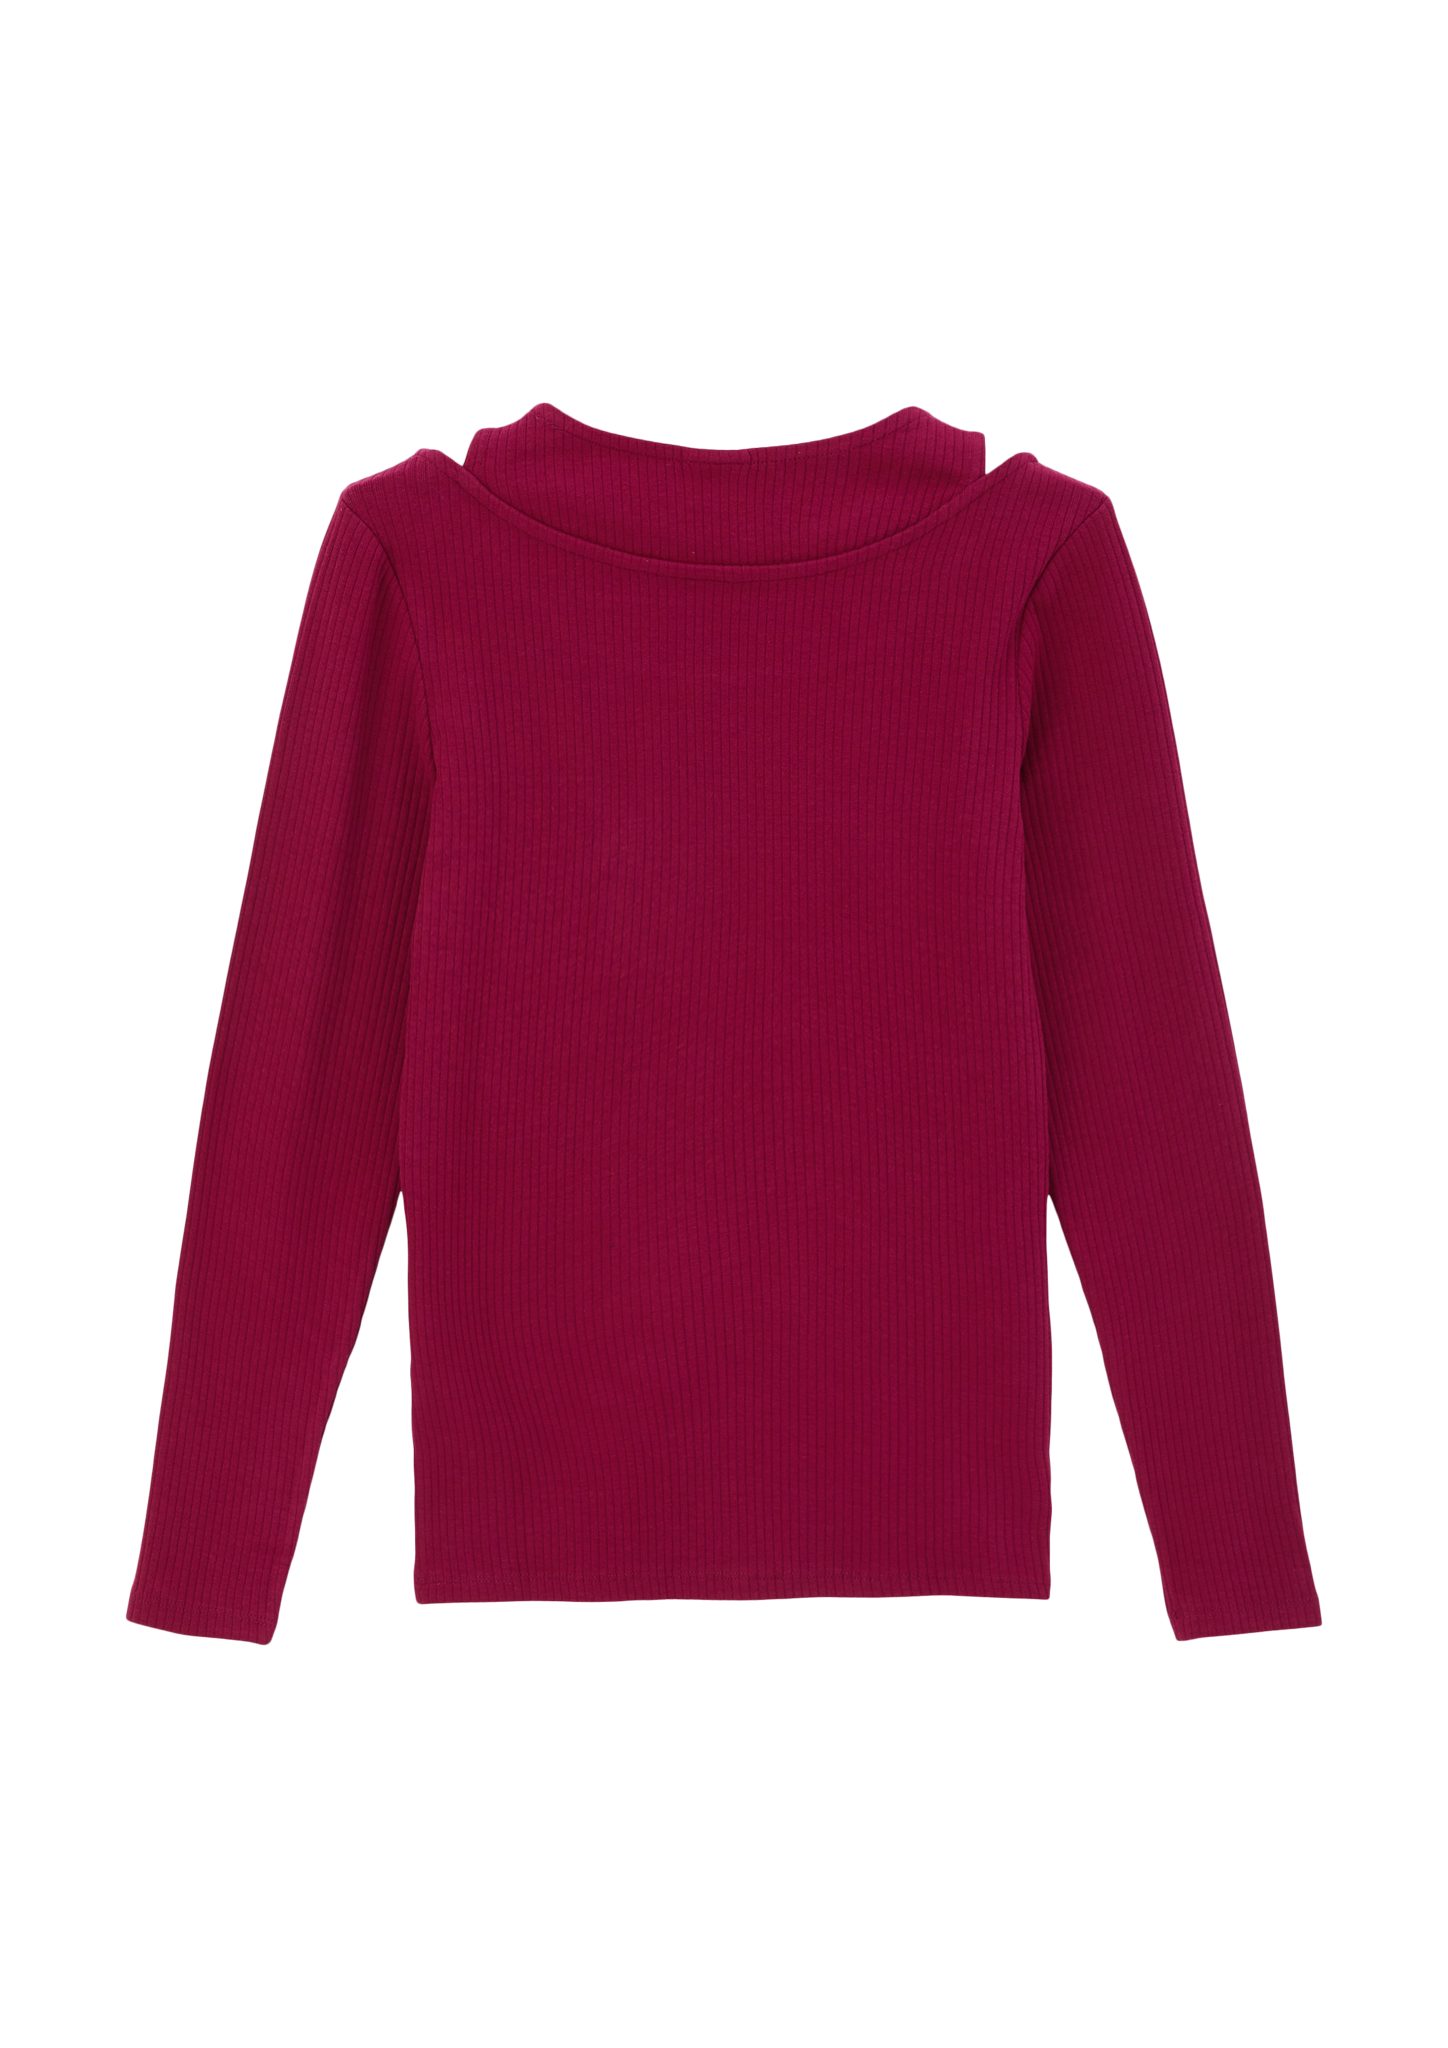 Longsleeve s.Oliver Geripptes 2-in1-Optik Out, fuchsia Teilungsnähte Langarmshirt mit Cut